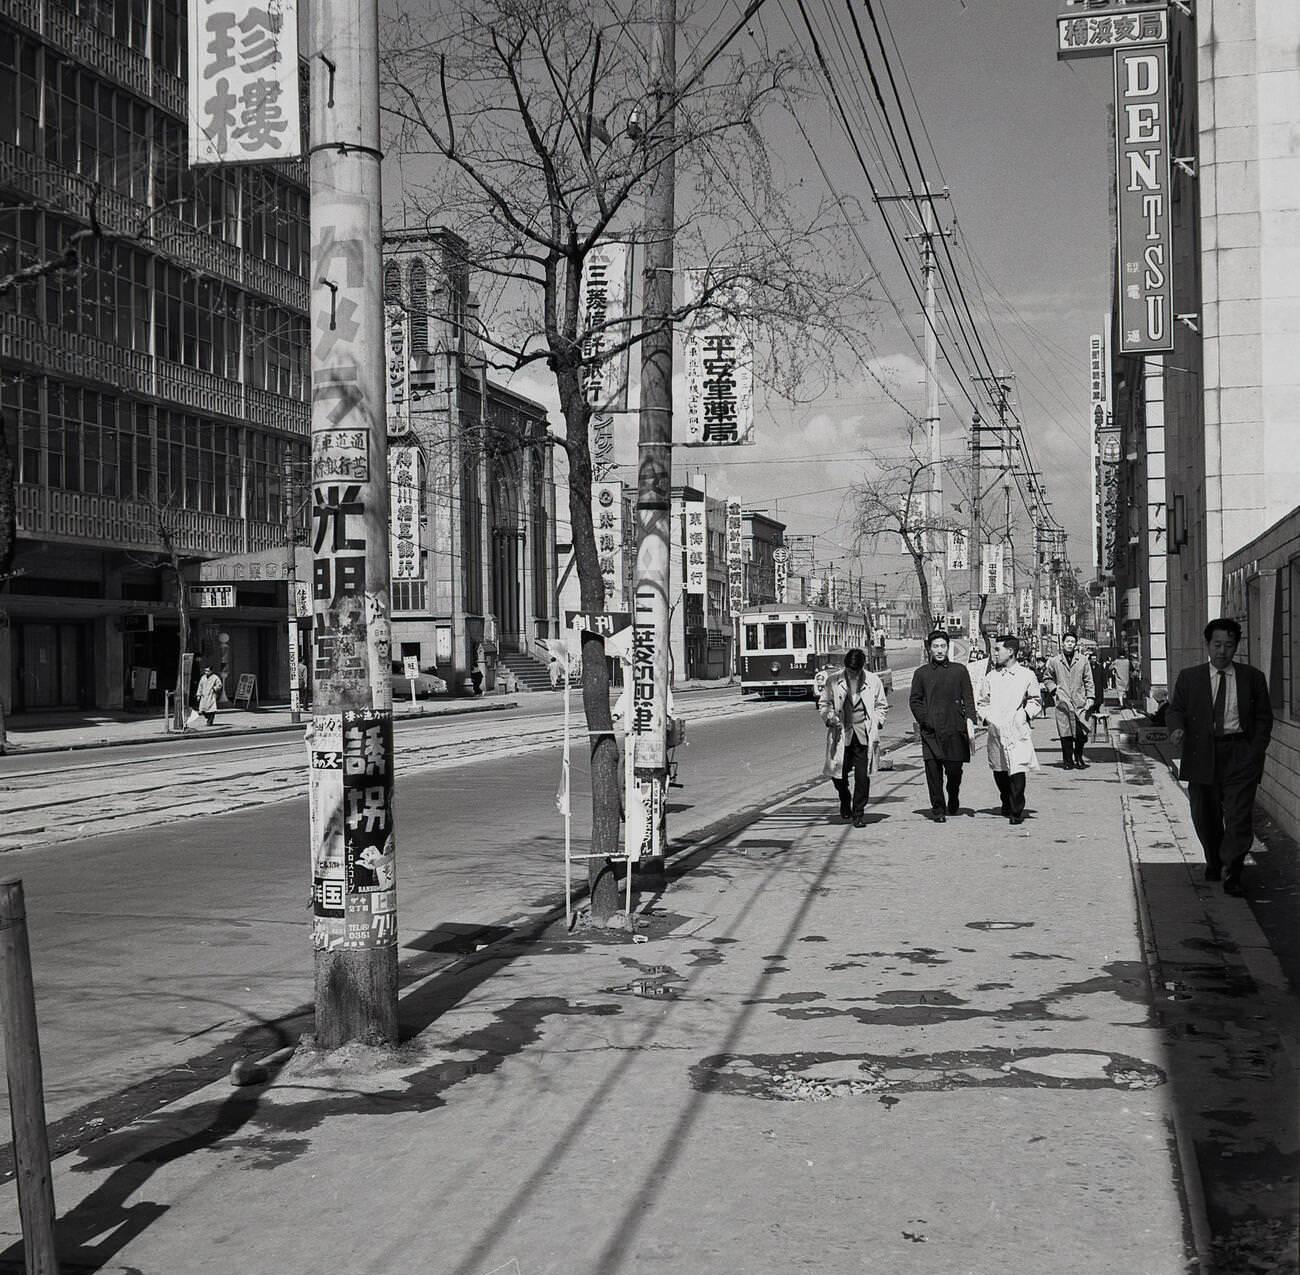 A city centre street in Tokyo, 1955.